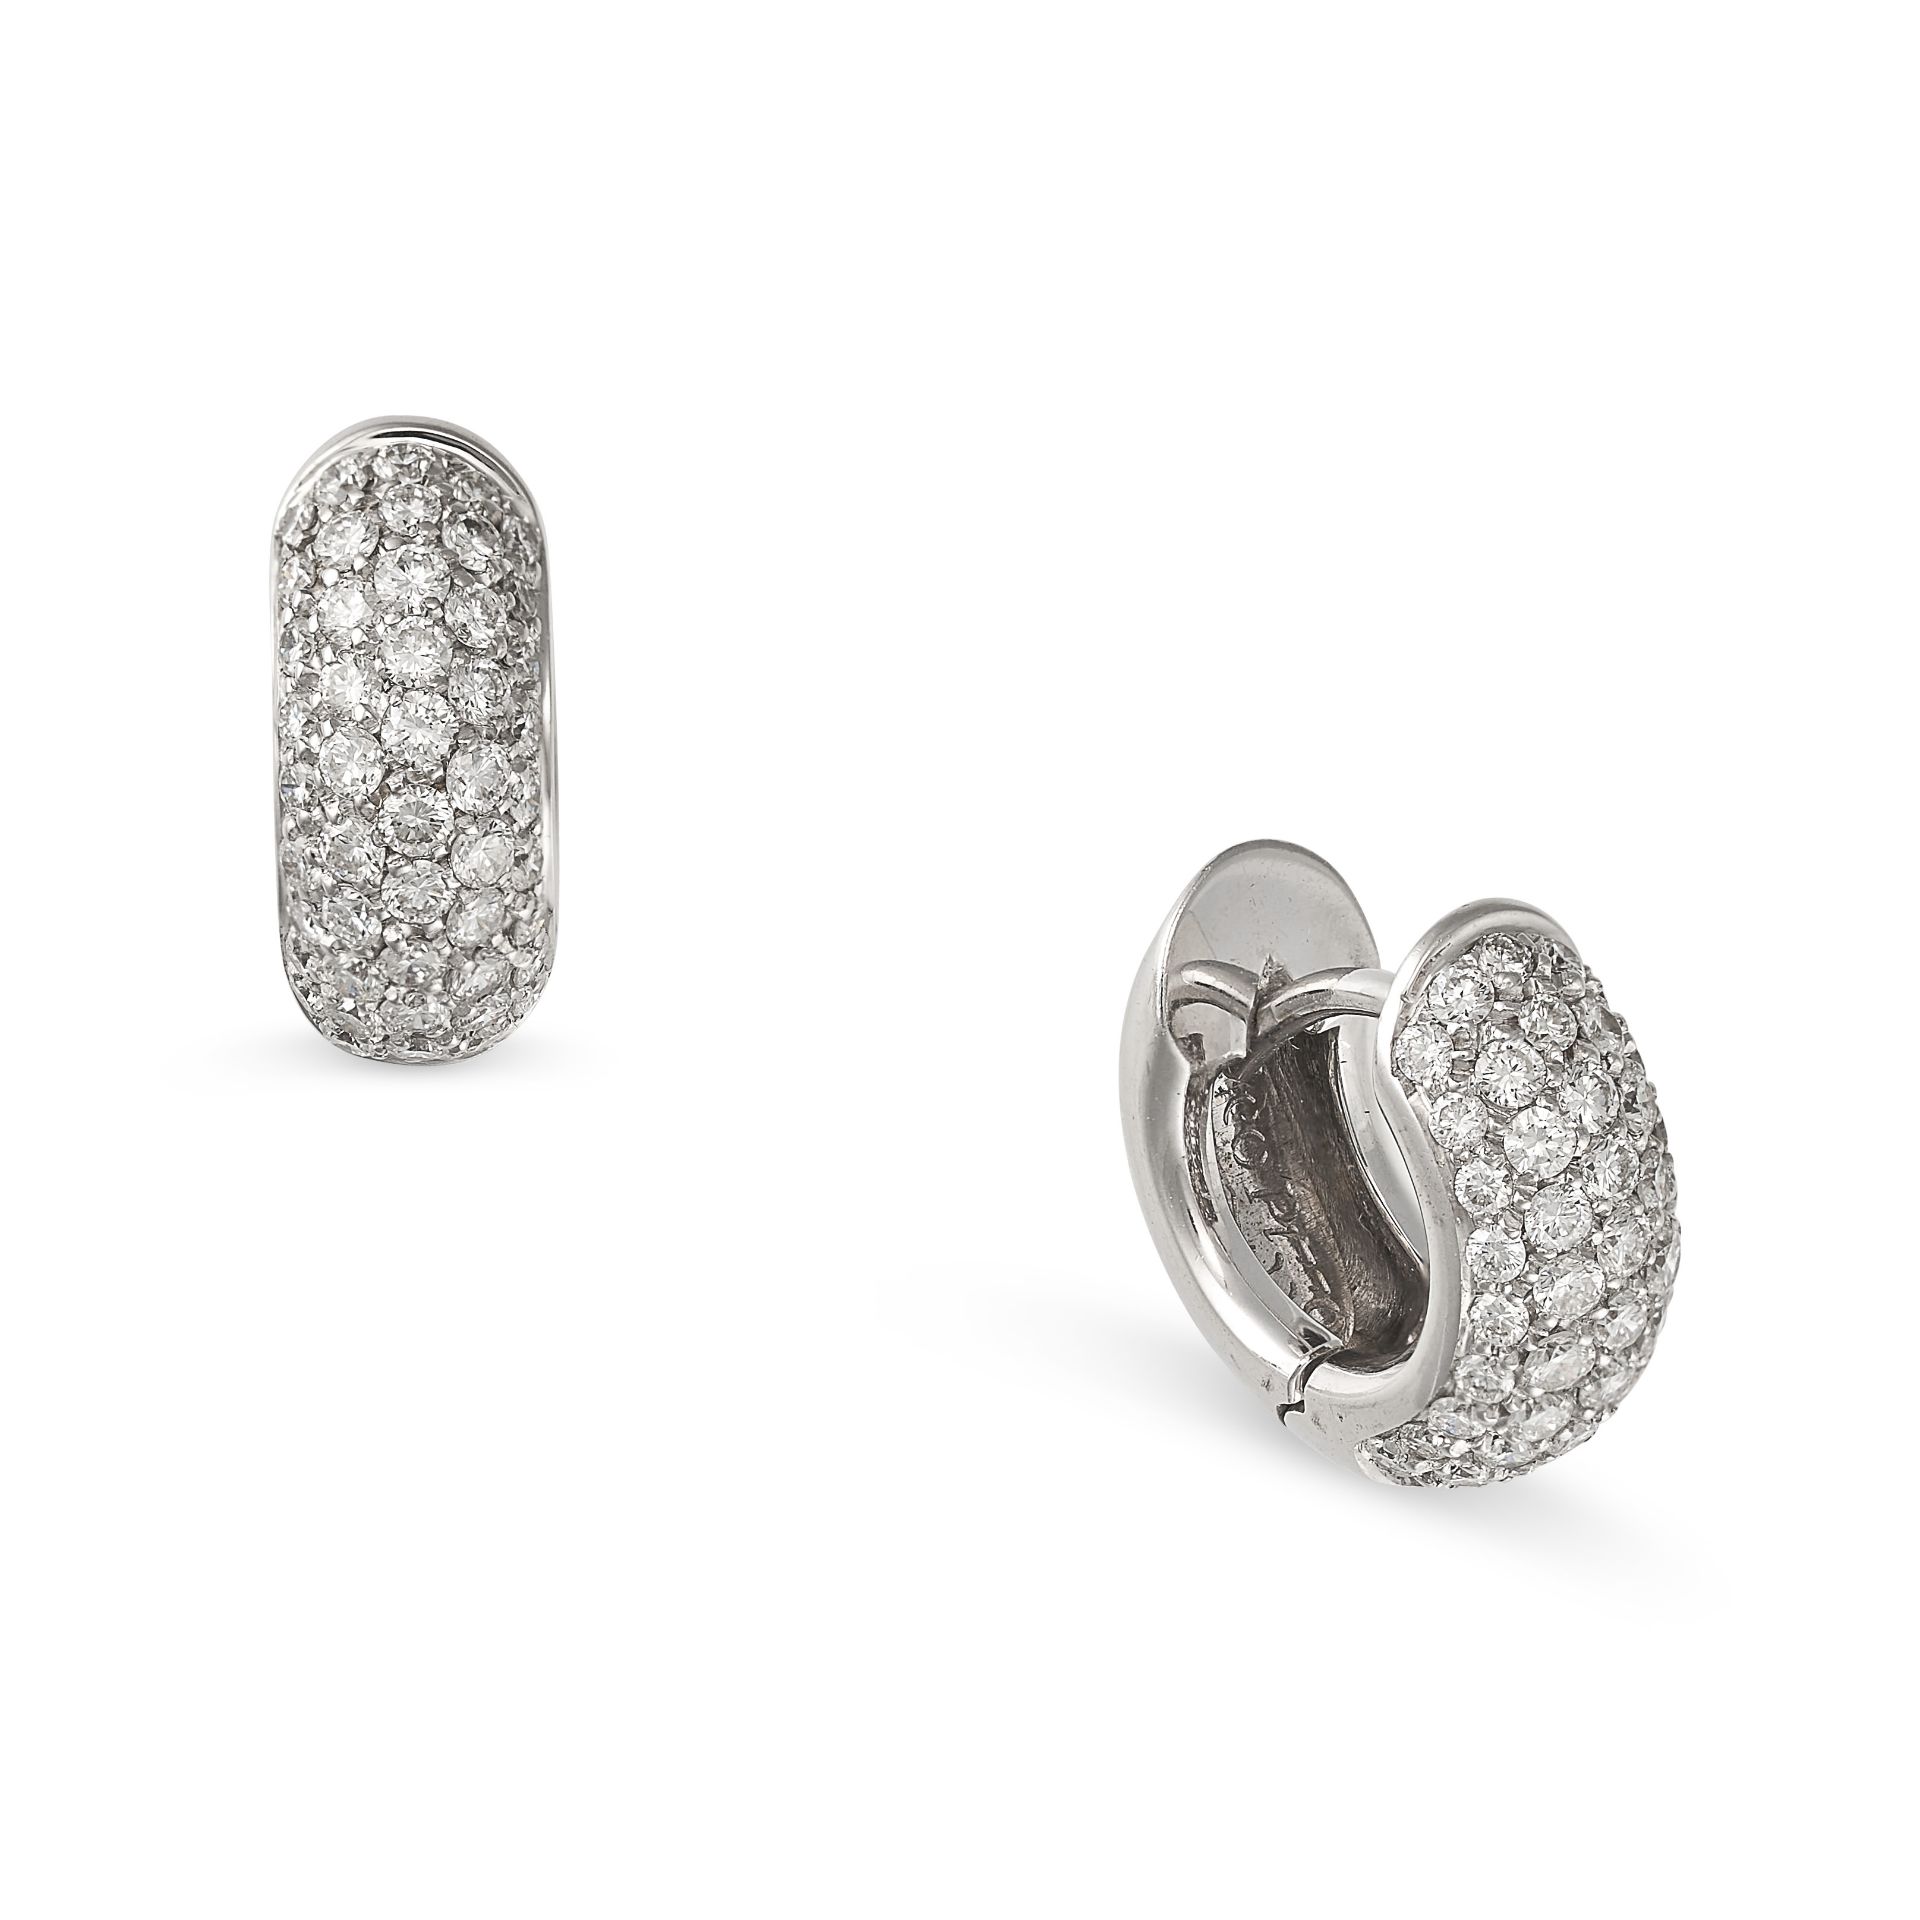 A PAIR OF DIAMOND HOOP EARRINGS in 18ct white gold, each designed as a hoop pave set with round b...